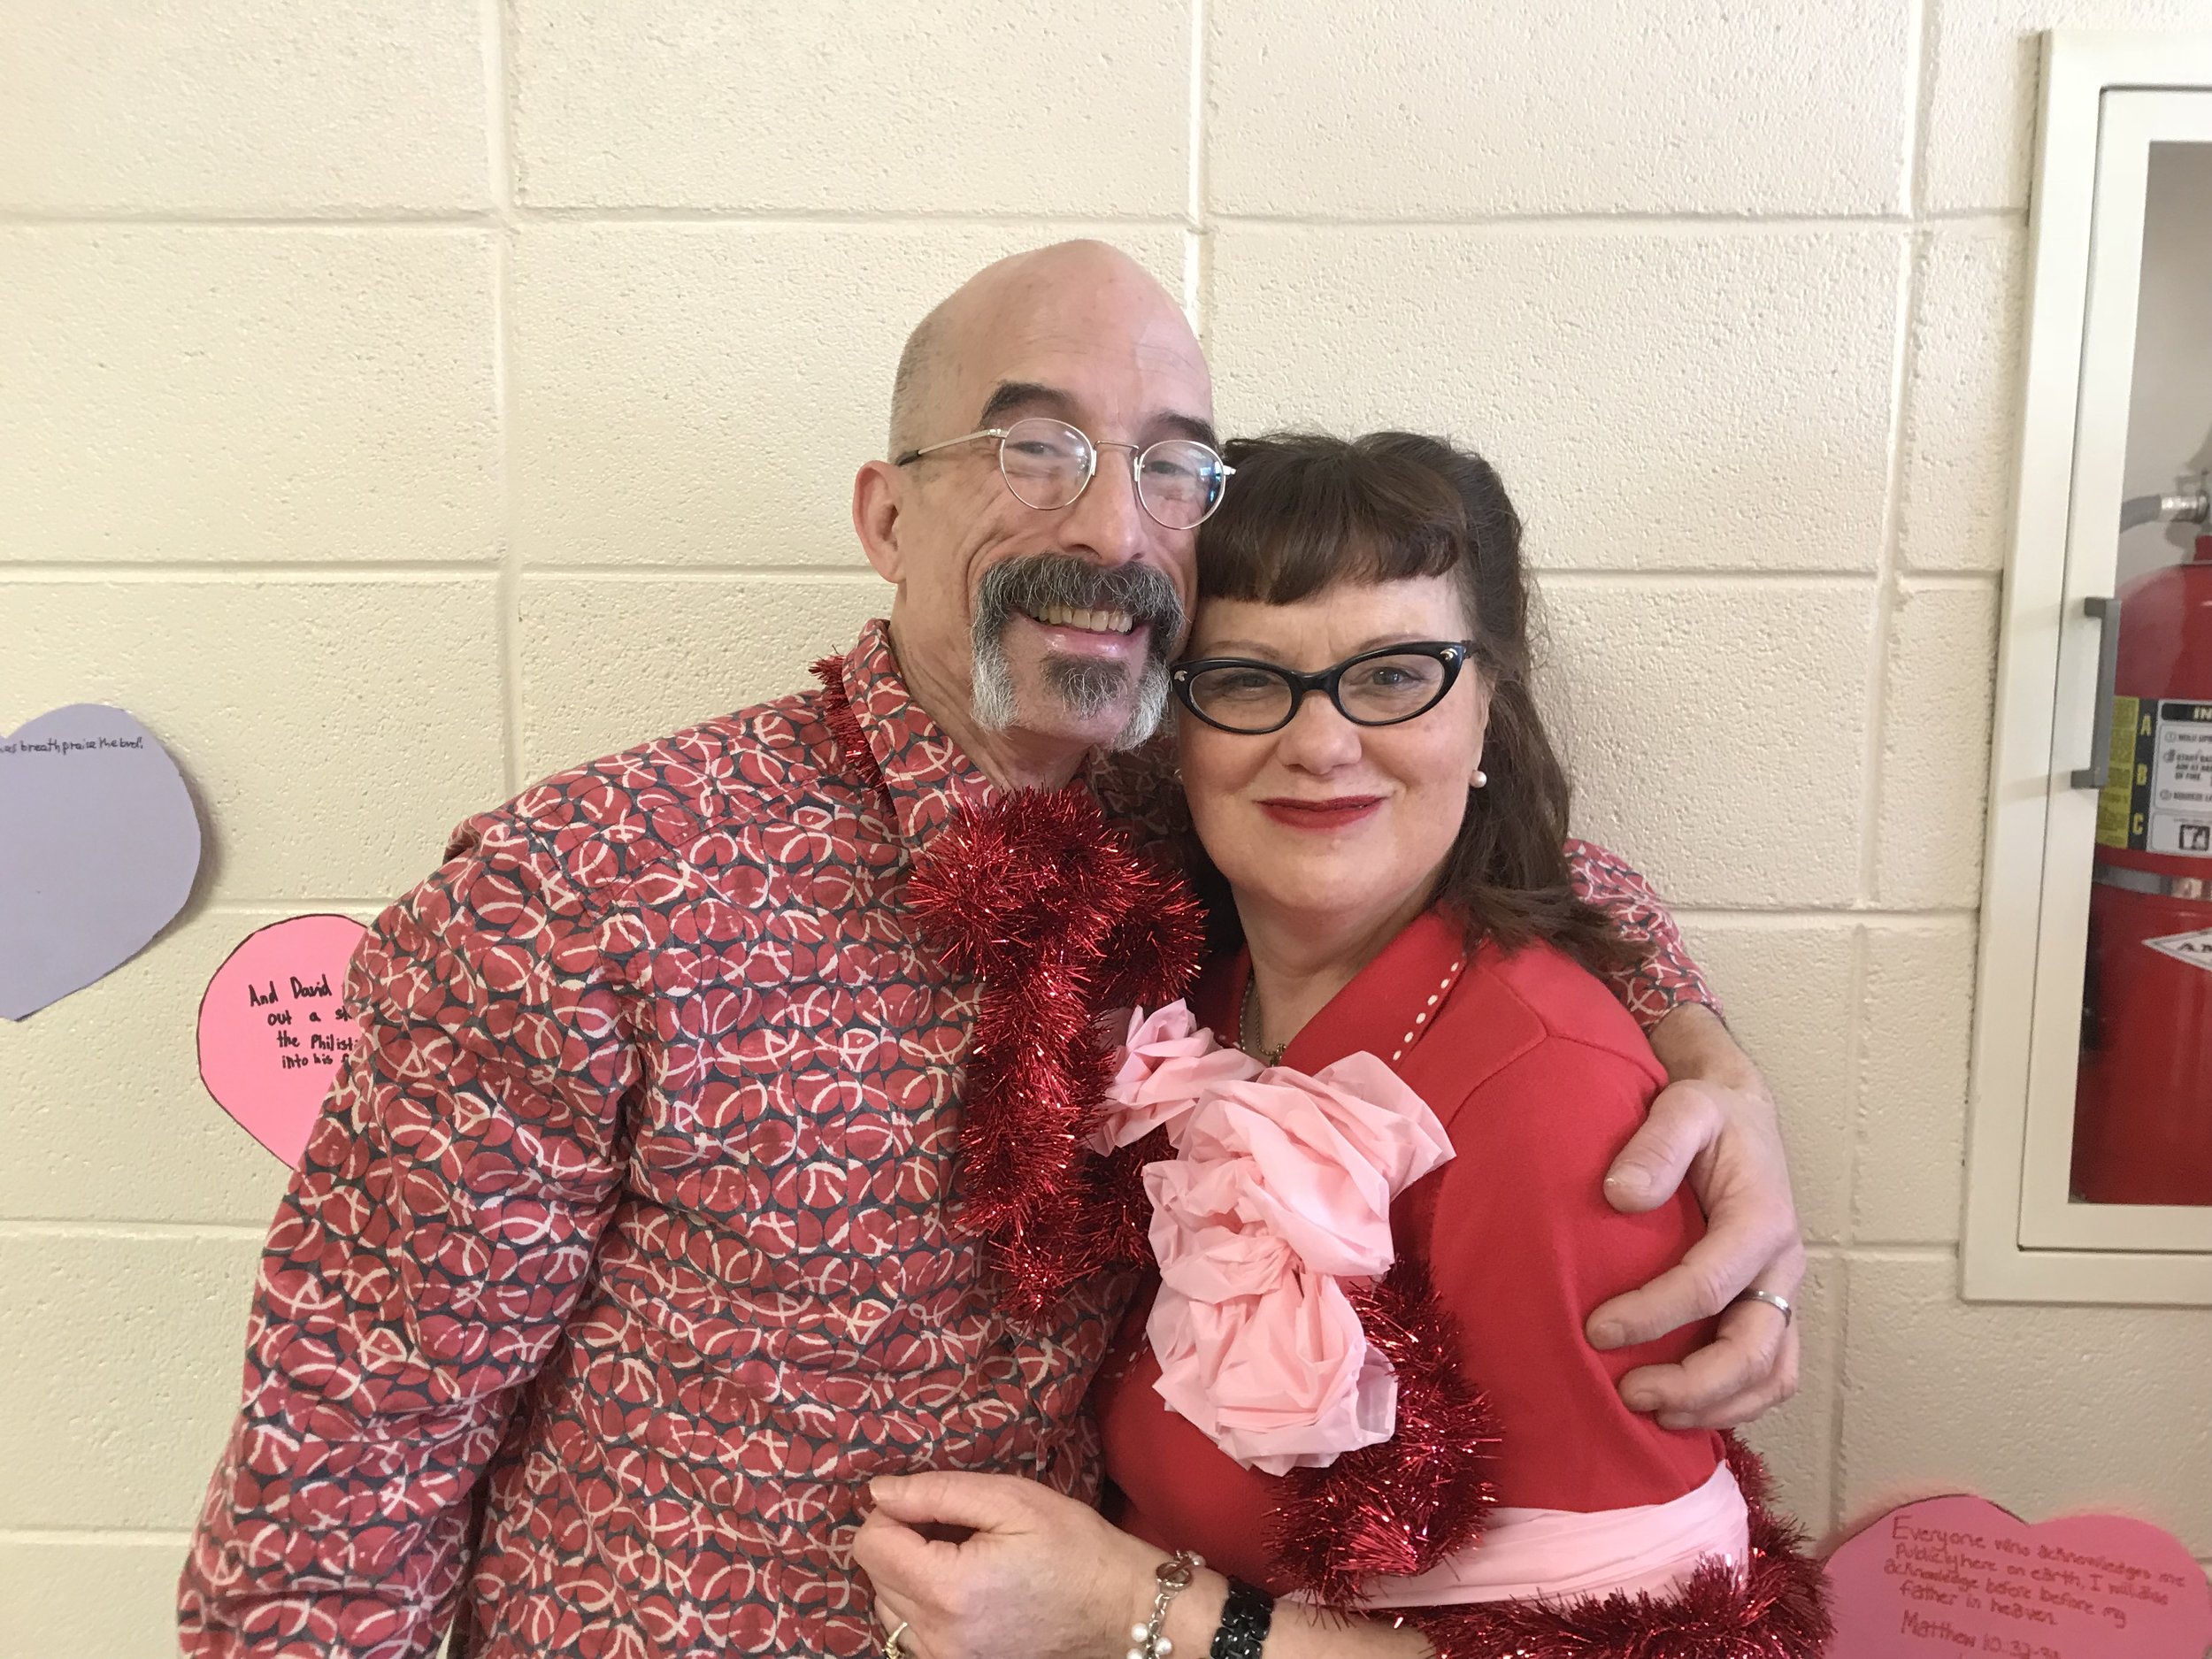   Penny and Diva, our Sweetheart Couple at MCASD's 57th Annual Sweetheart Dance, 2/19/2017, at Trinity Lutheran Church in Roselle  